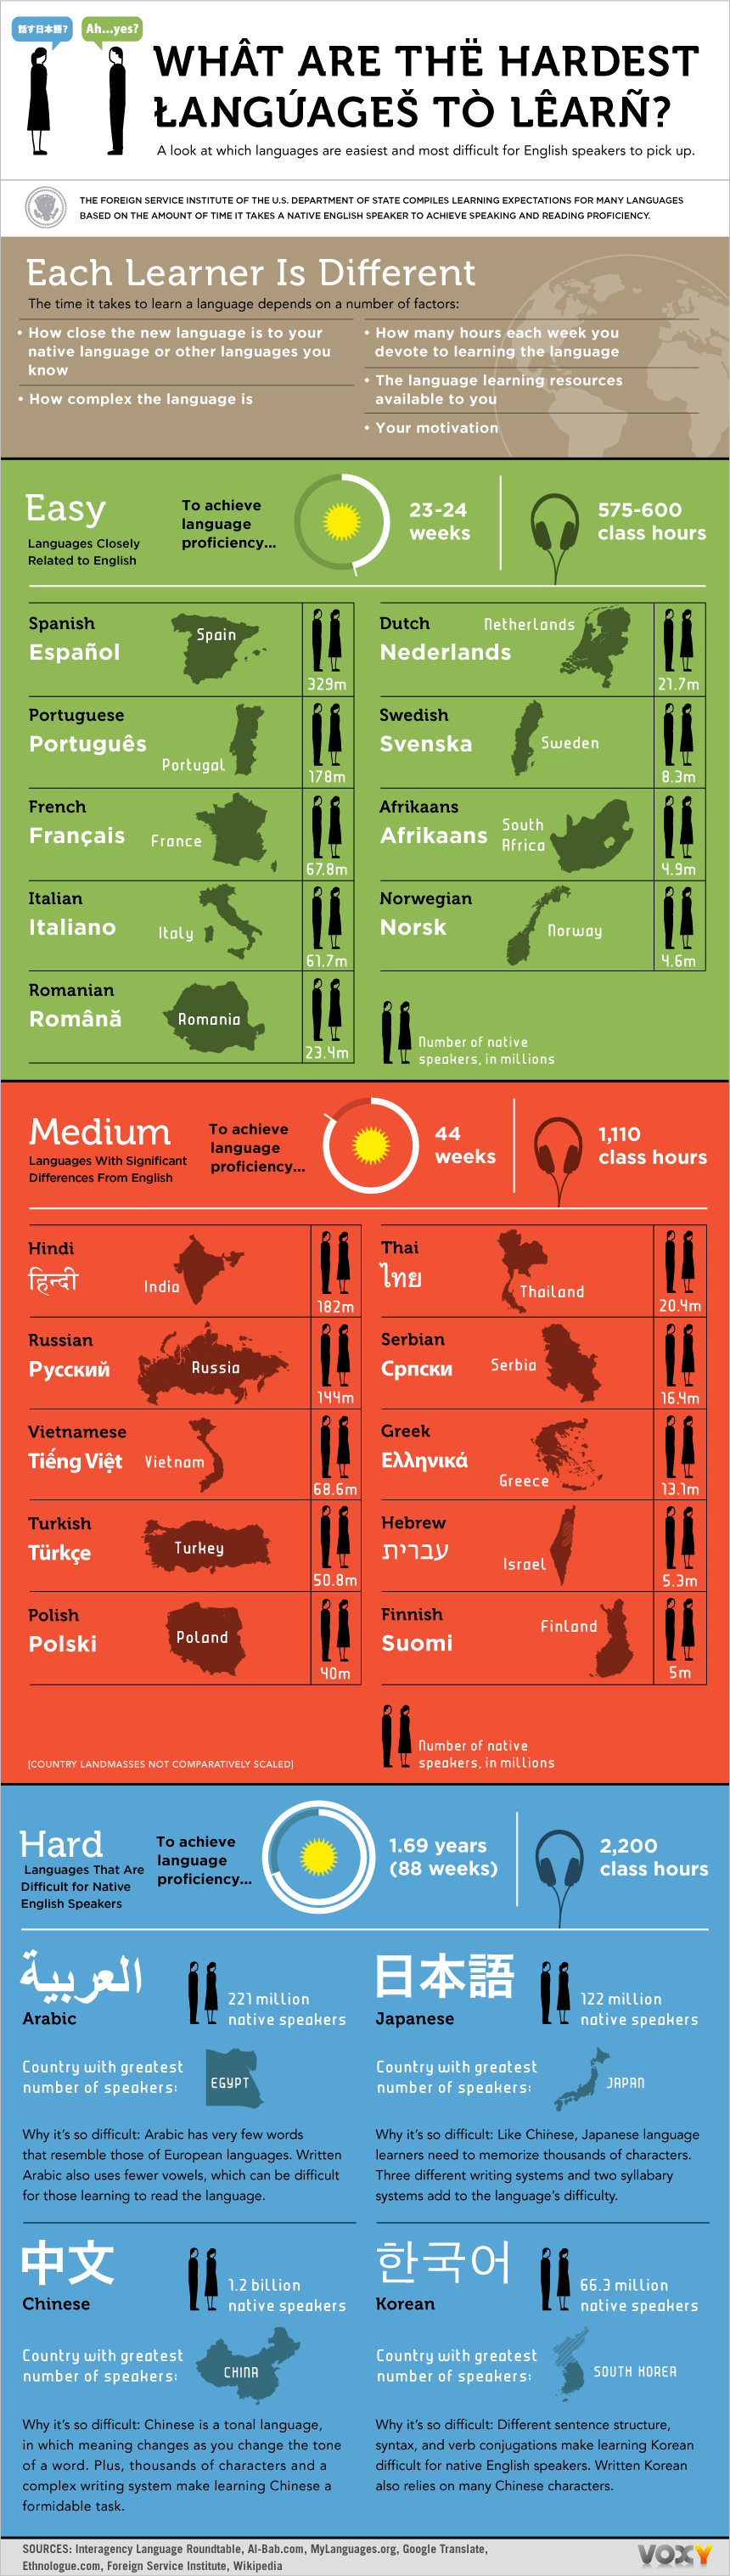 What Are the Hardest Languages to Learn Infographic